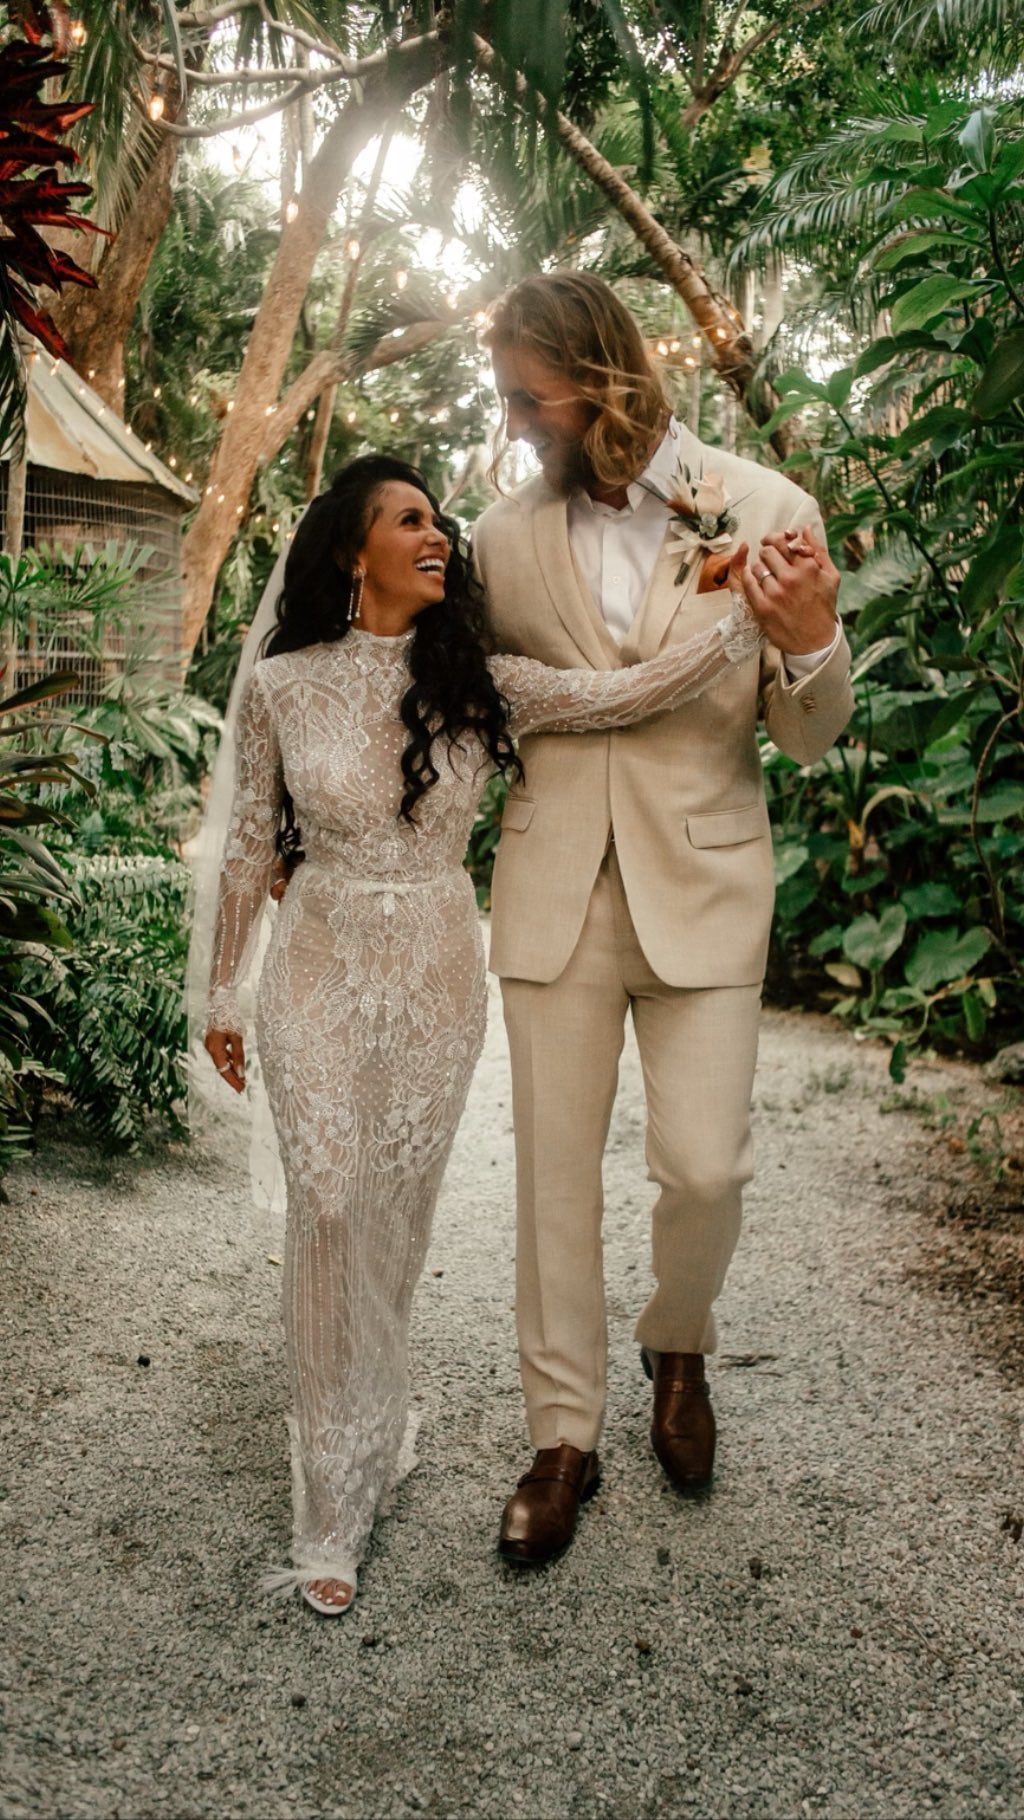 Vanessa Morgan and Michael Kopech Announce Their Engagement on Instagram